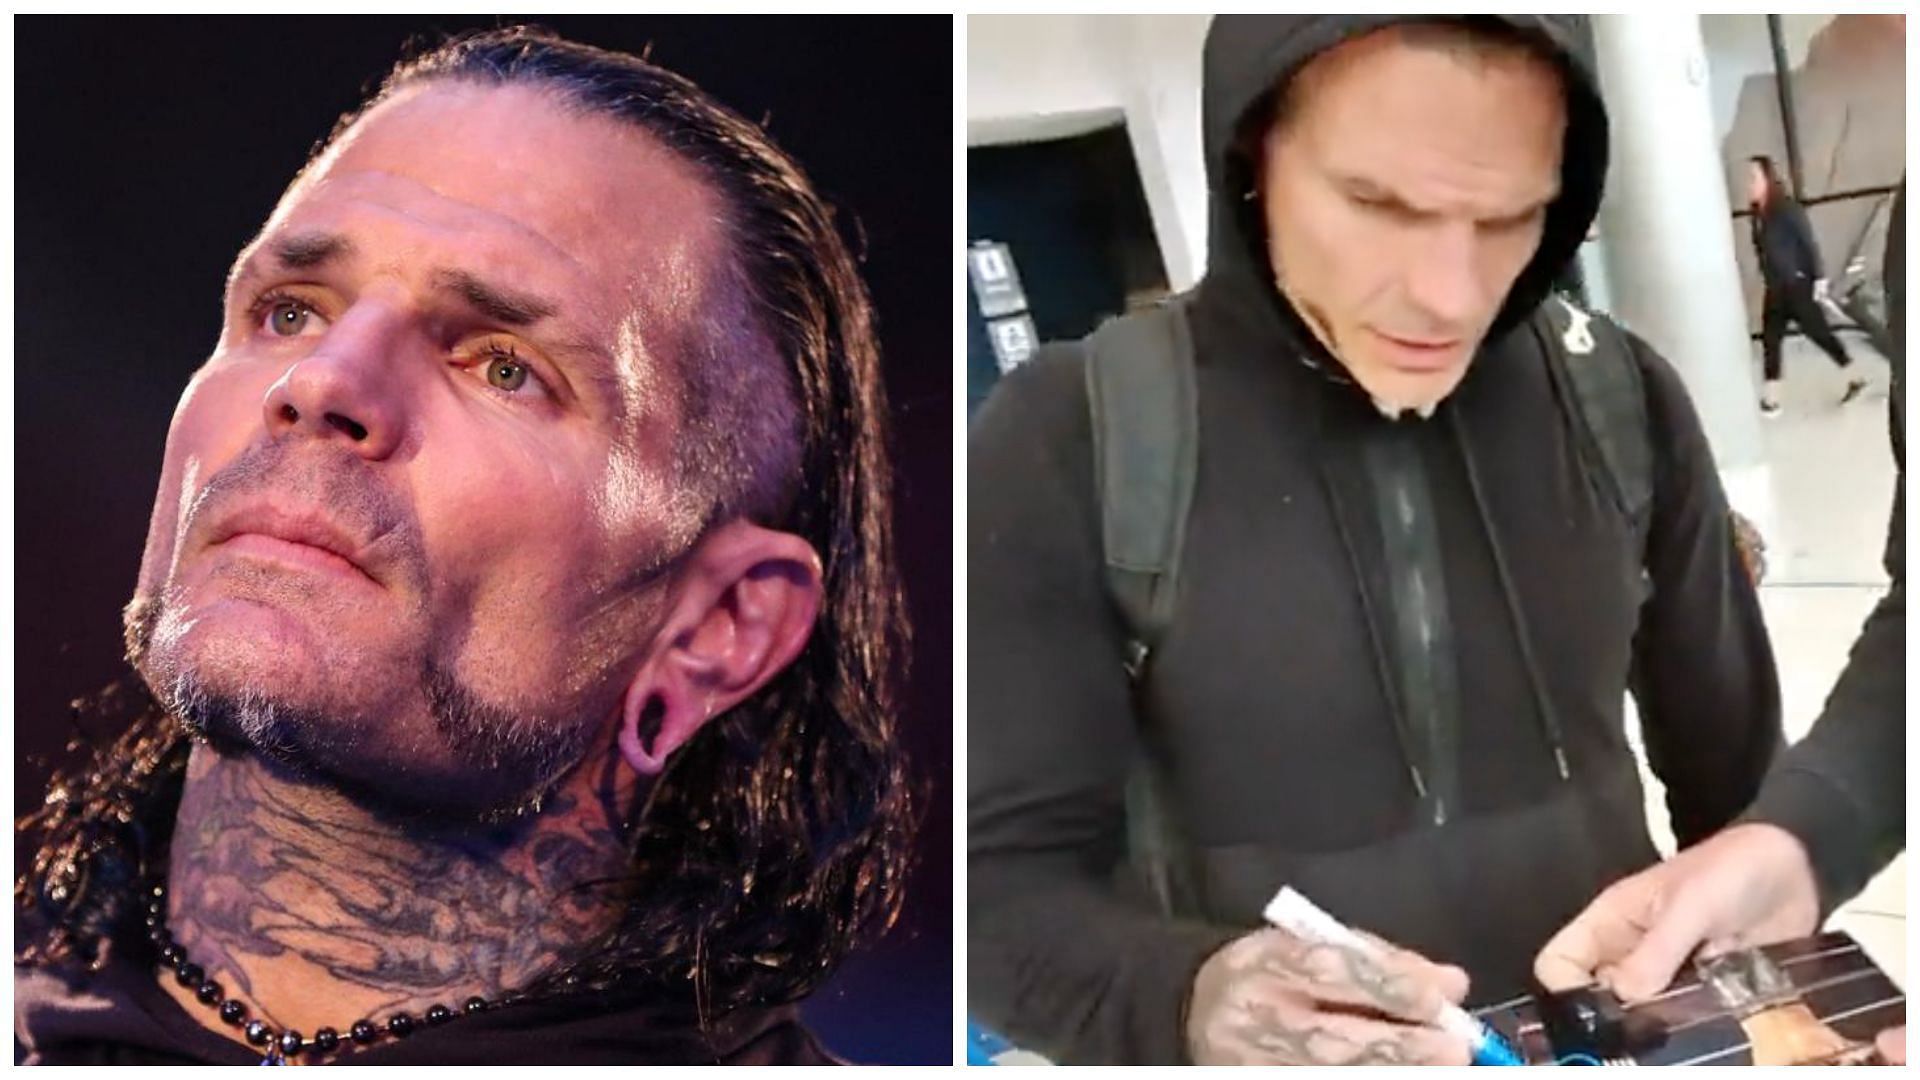 Jeff Hardy is former WWE Champion and current AEW star.